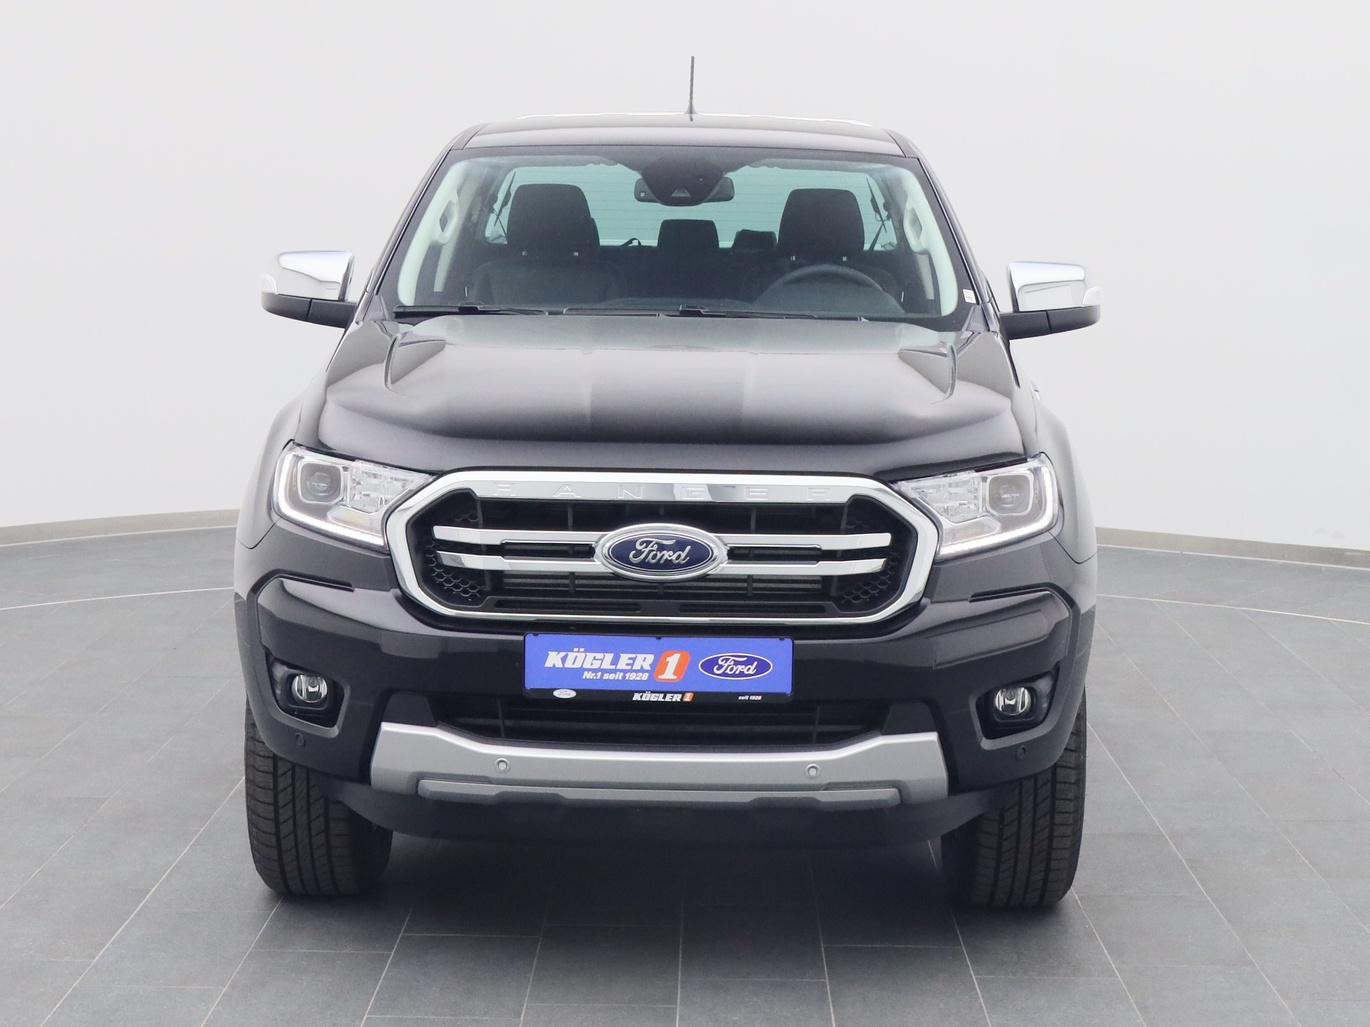 Frontansicht eines Ford Ranger DoKa Limited 213PS / AHK / PDC / Rollo in Agate Black 